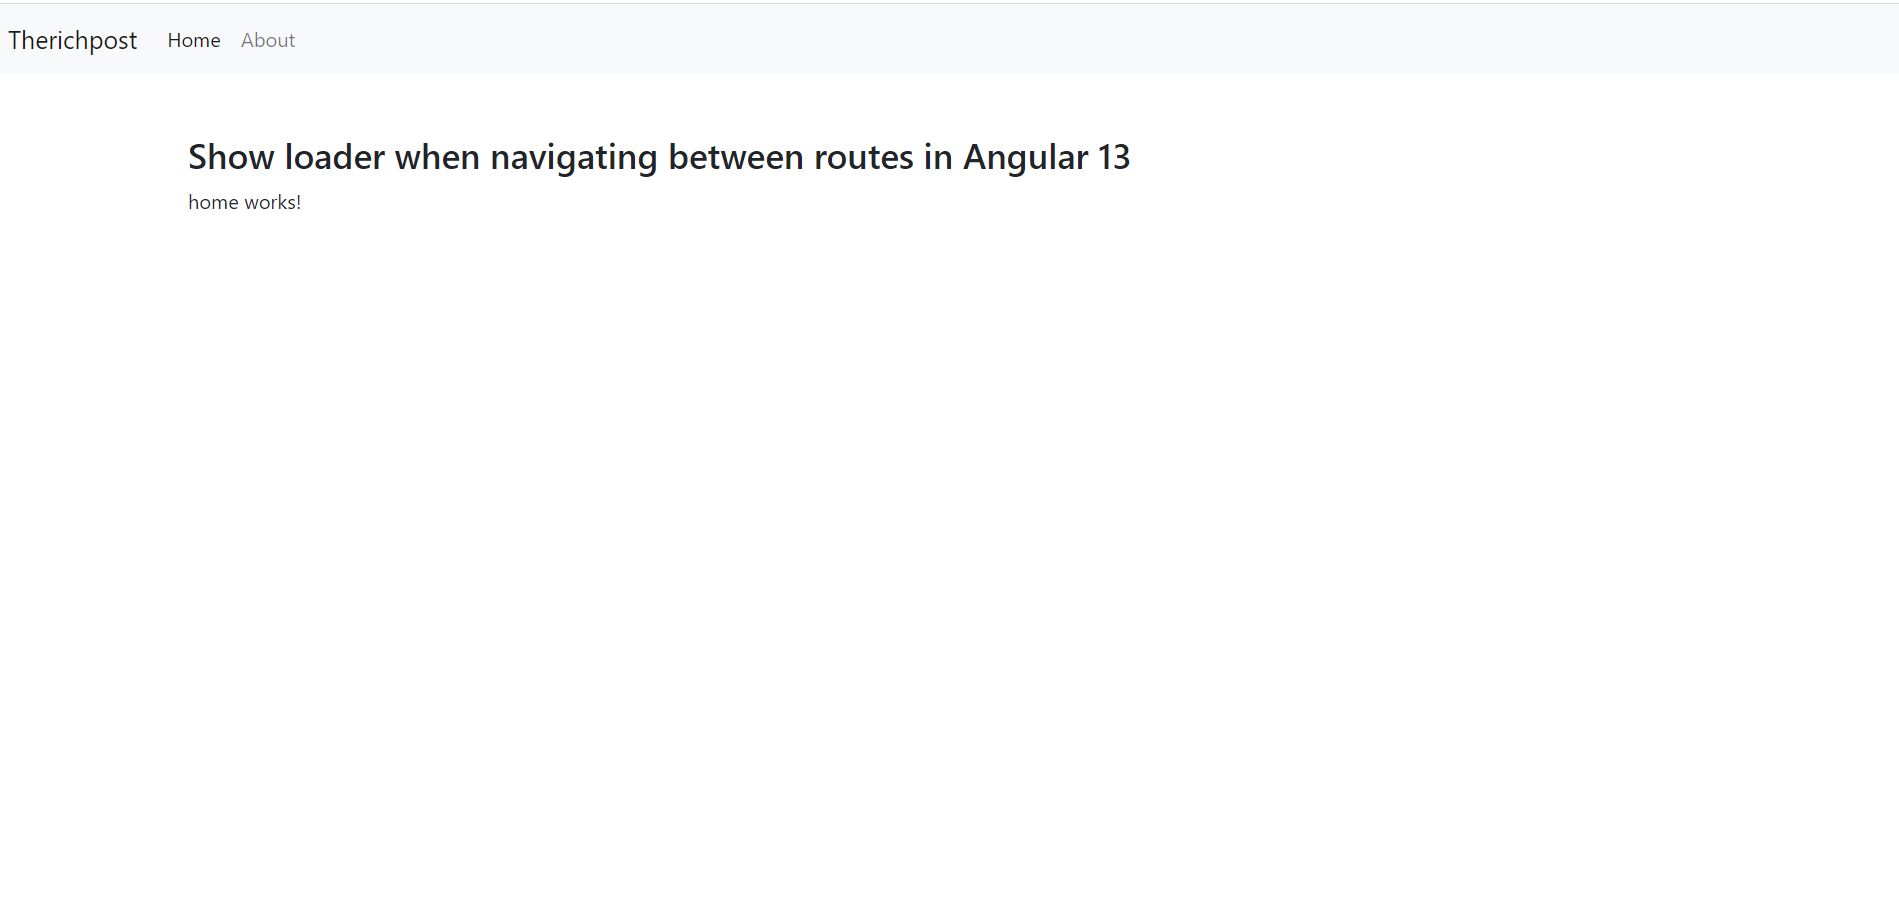 Show loader when navigating between routes in Angular 13